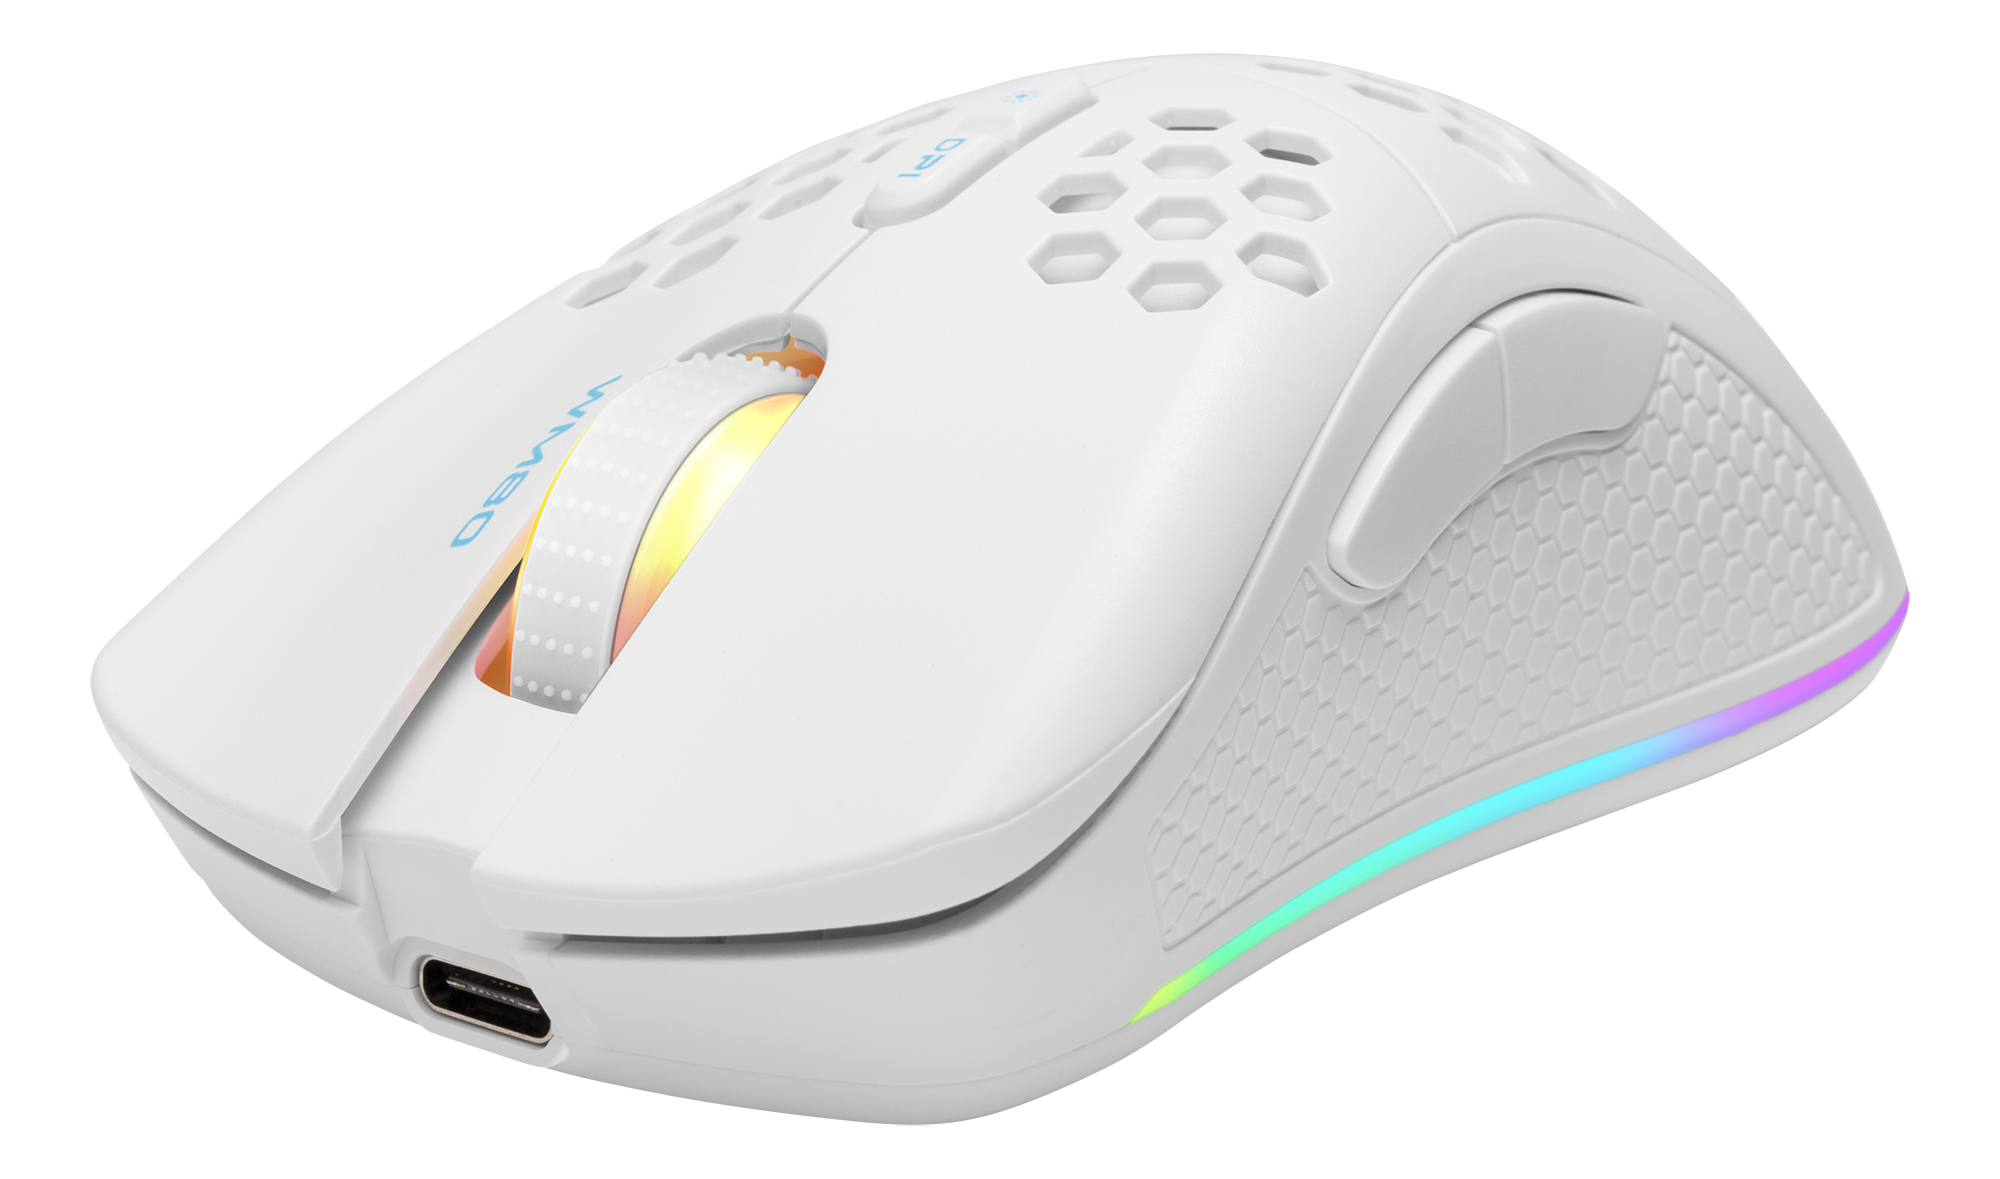 Wireless ultralight gaming mouse DELTACO GAMING WHITE LINE 70g weight, RGB, SPCP6651, 400-6400 DPI, 1000 Hz, white / GAM-120-W